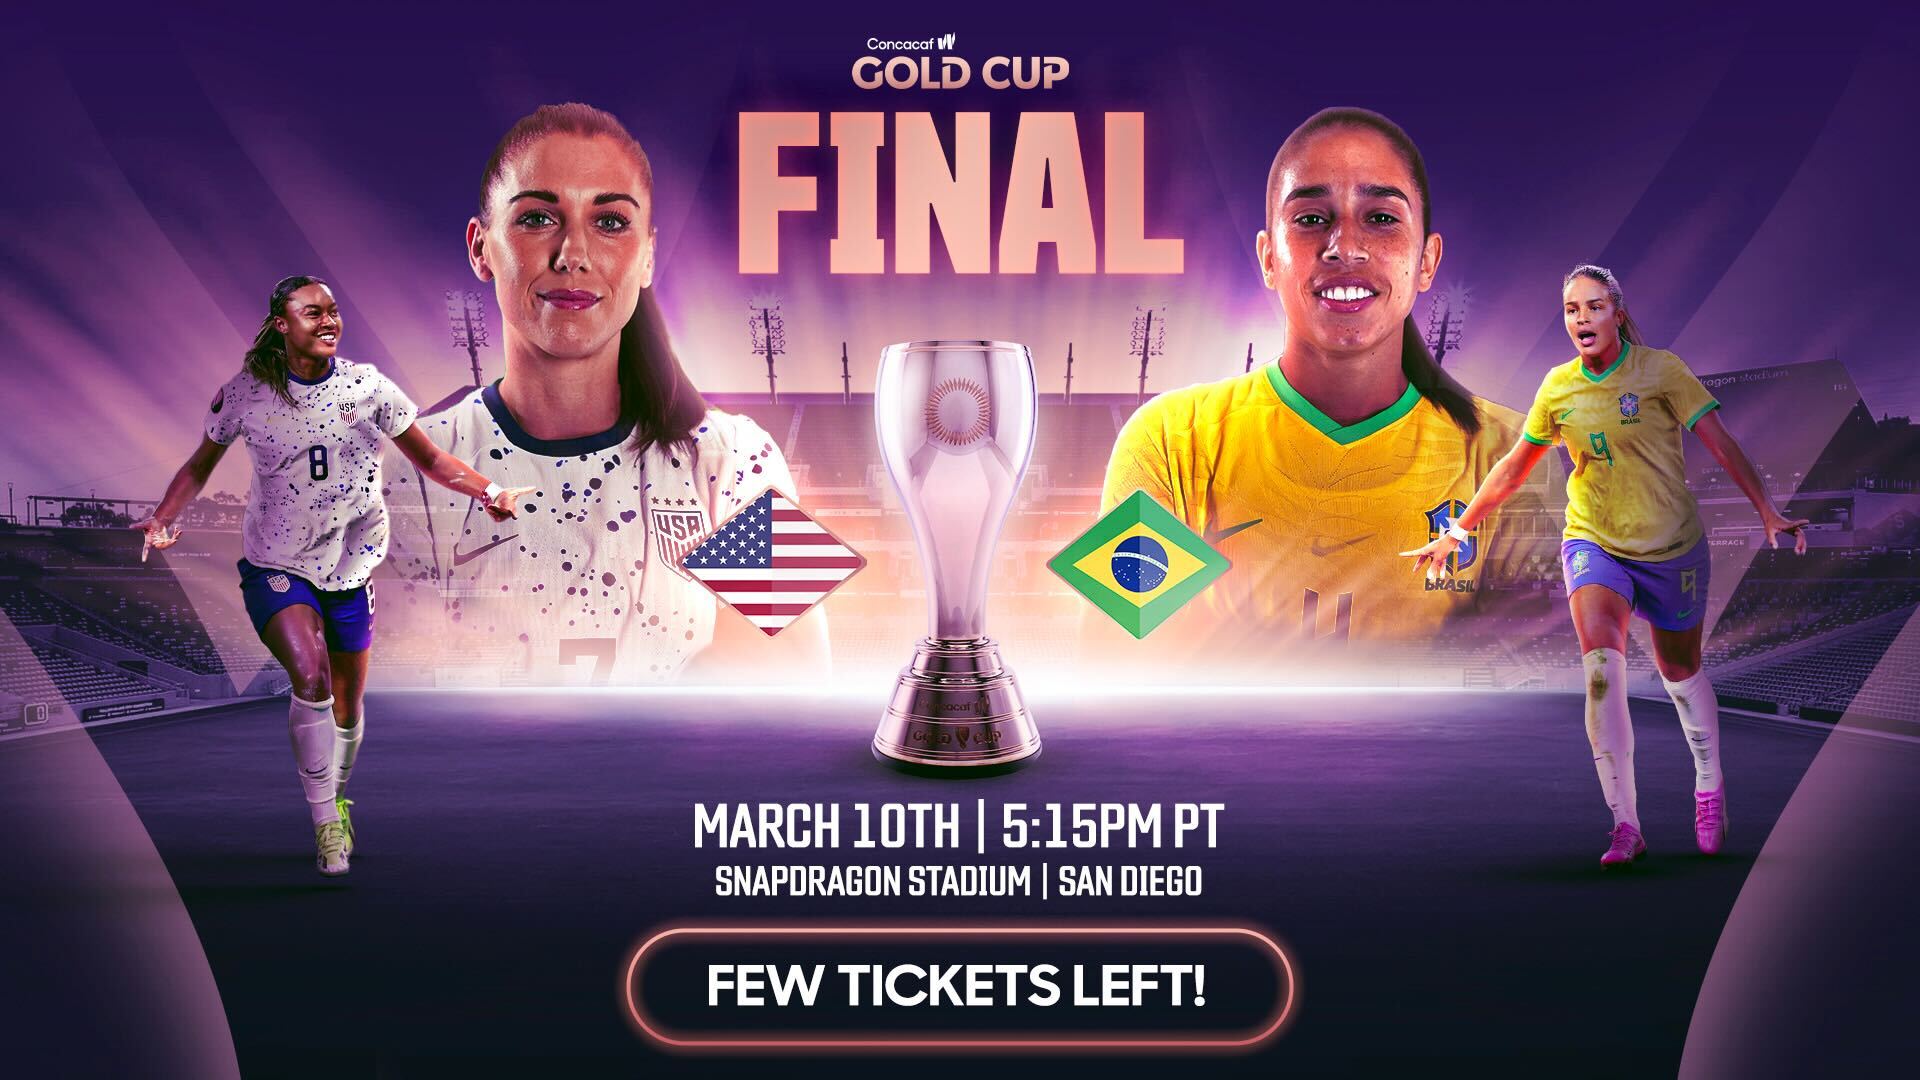 Close to 30,000 tickets sold for 2024 Concacaf W Gold Cup Final at